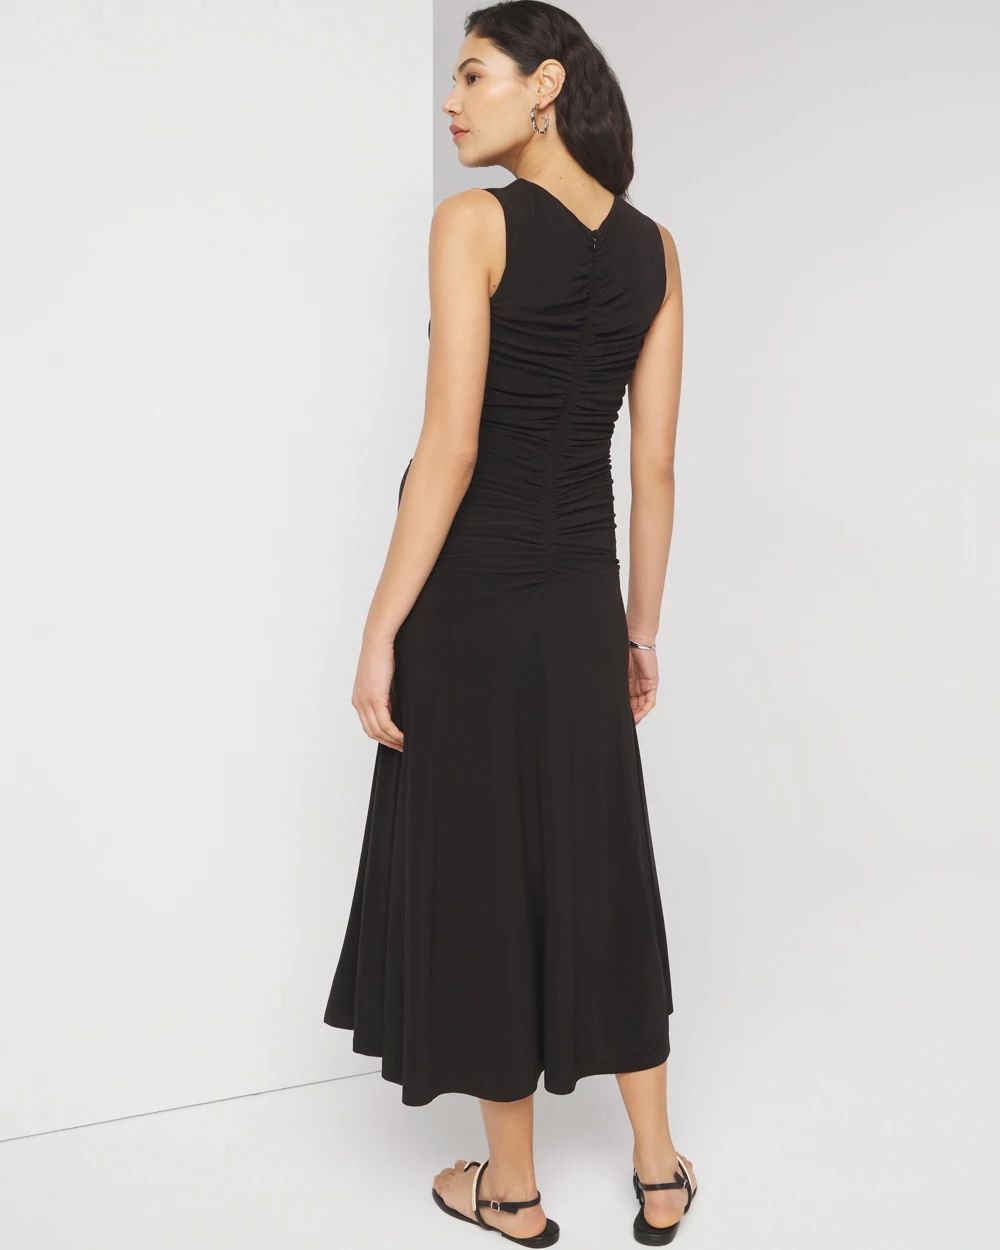 Petite Sleeveless Matte Jersey Ruched Keyhole Maxi Dress click to view larger image.